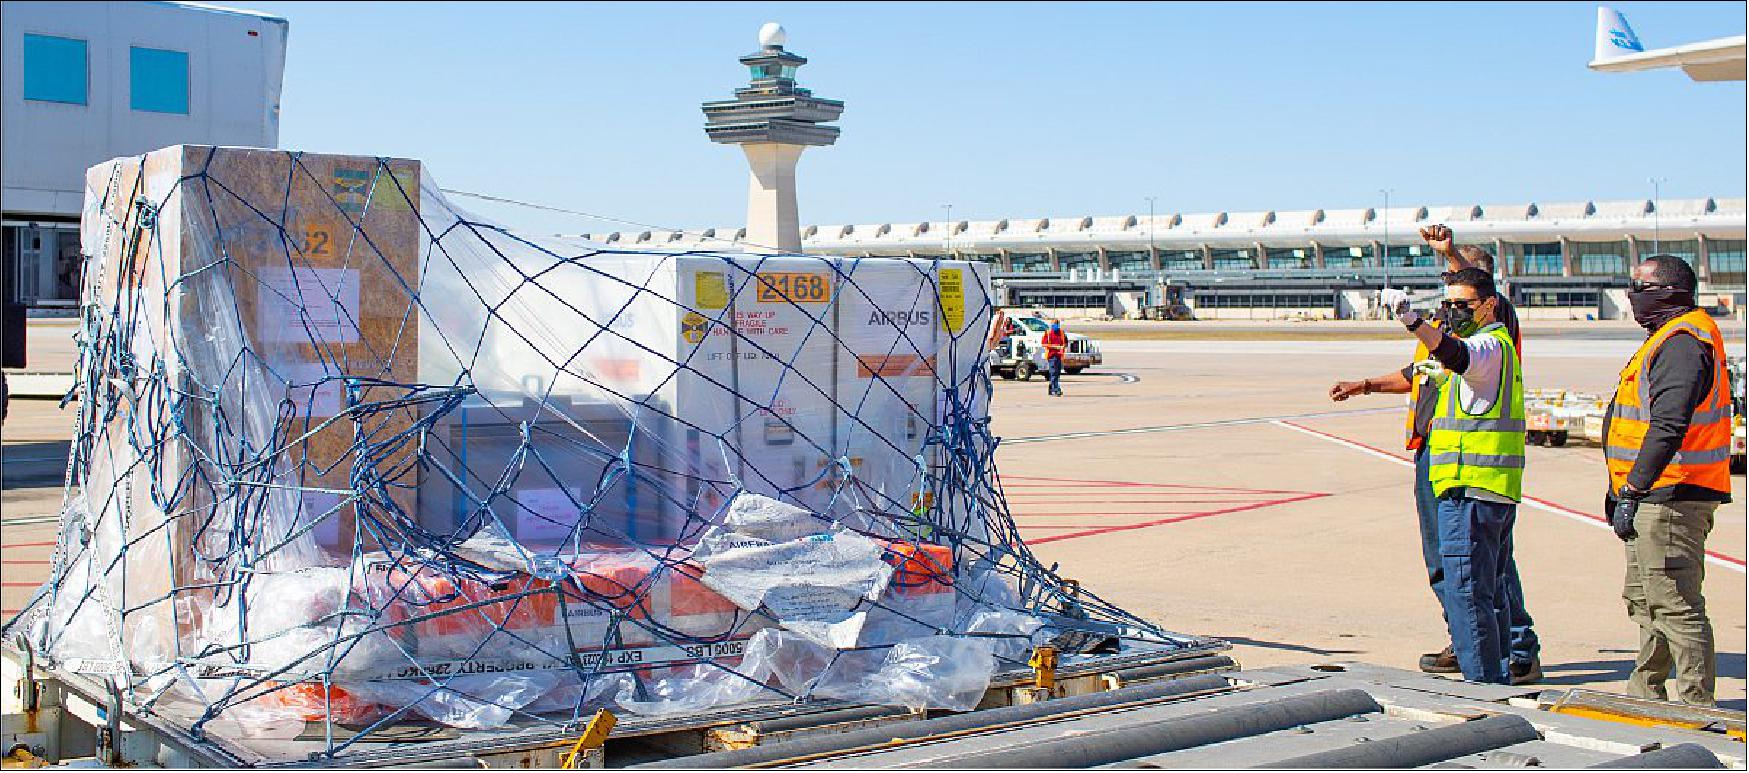 Figure 5: The SPEXone instrument is delivered and taken off the plane at Dulles International Airport (photo credit: Micheal Starobin/NASA)